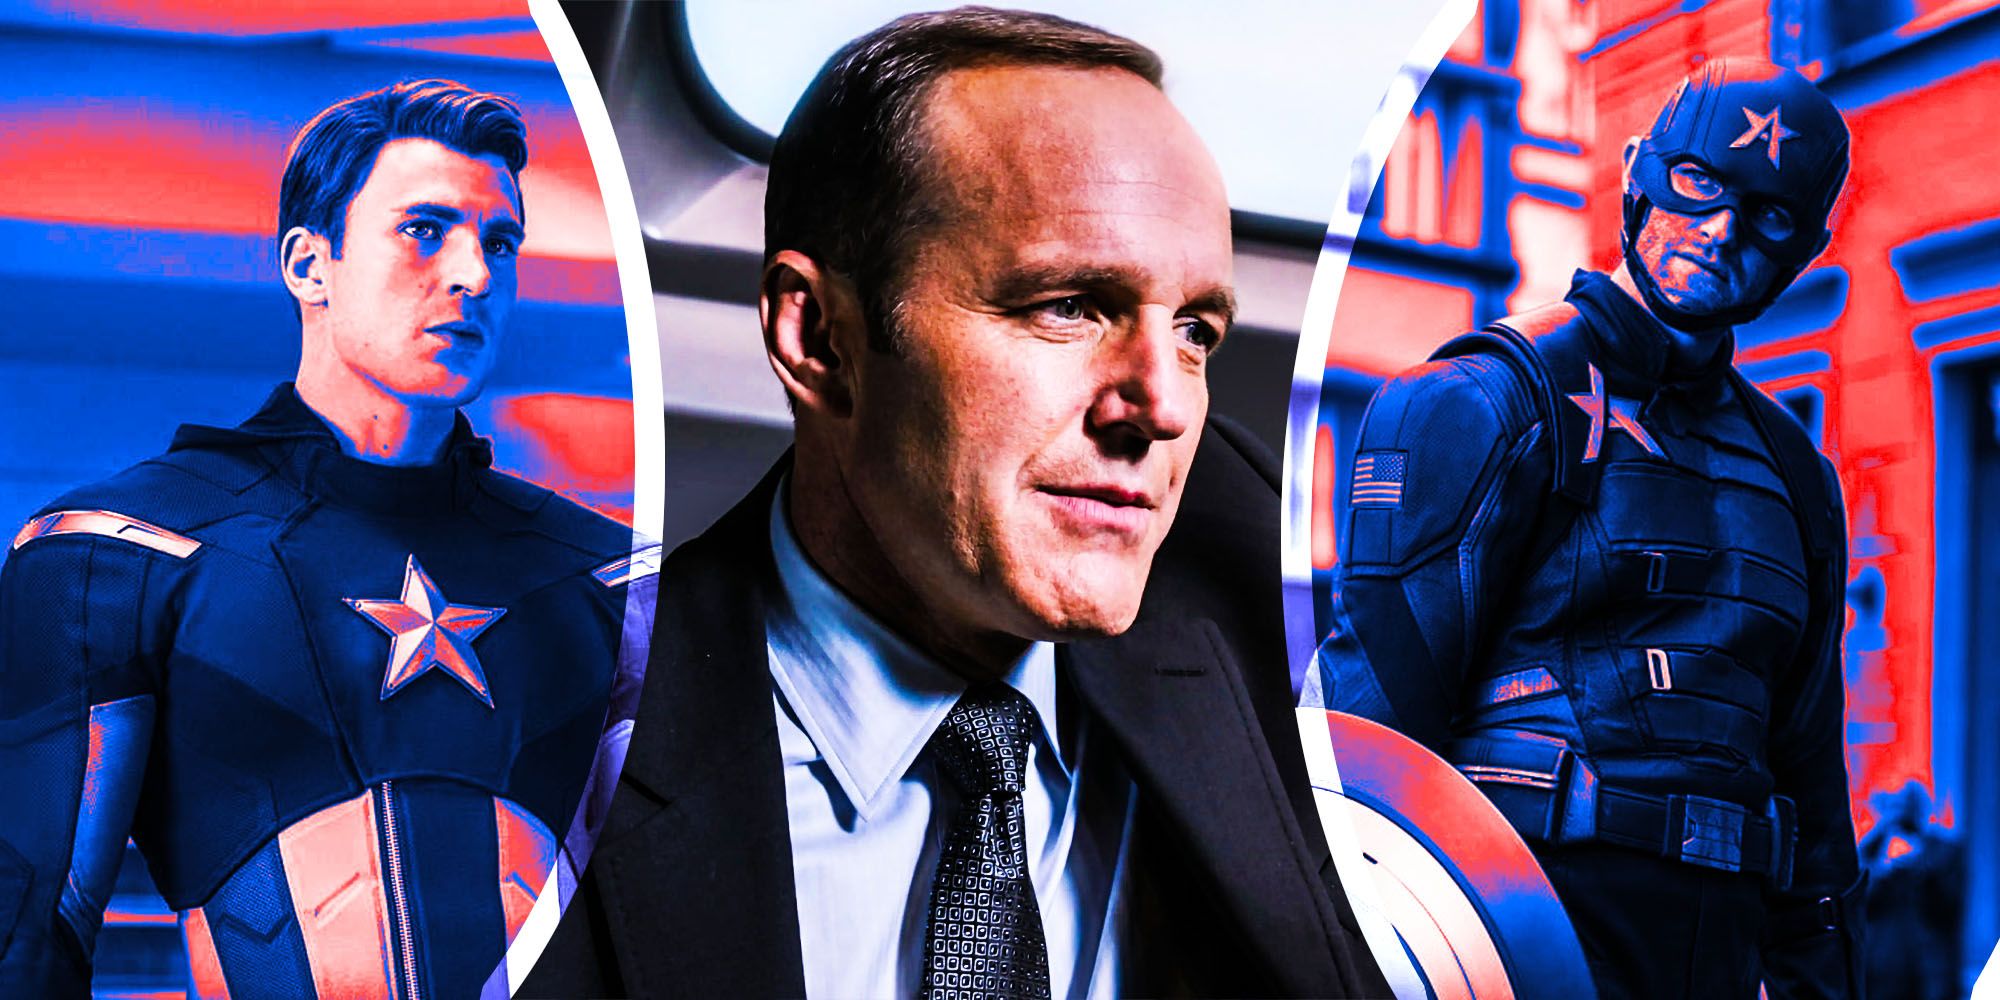 Phil Coulson captain america the Avengers John walker falcon and the winter soldier